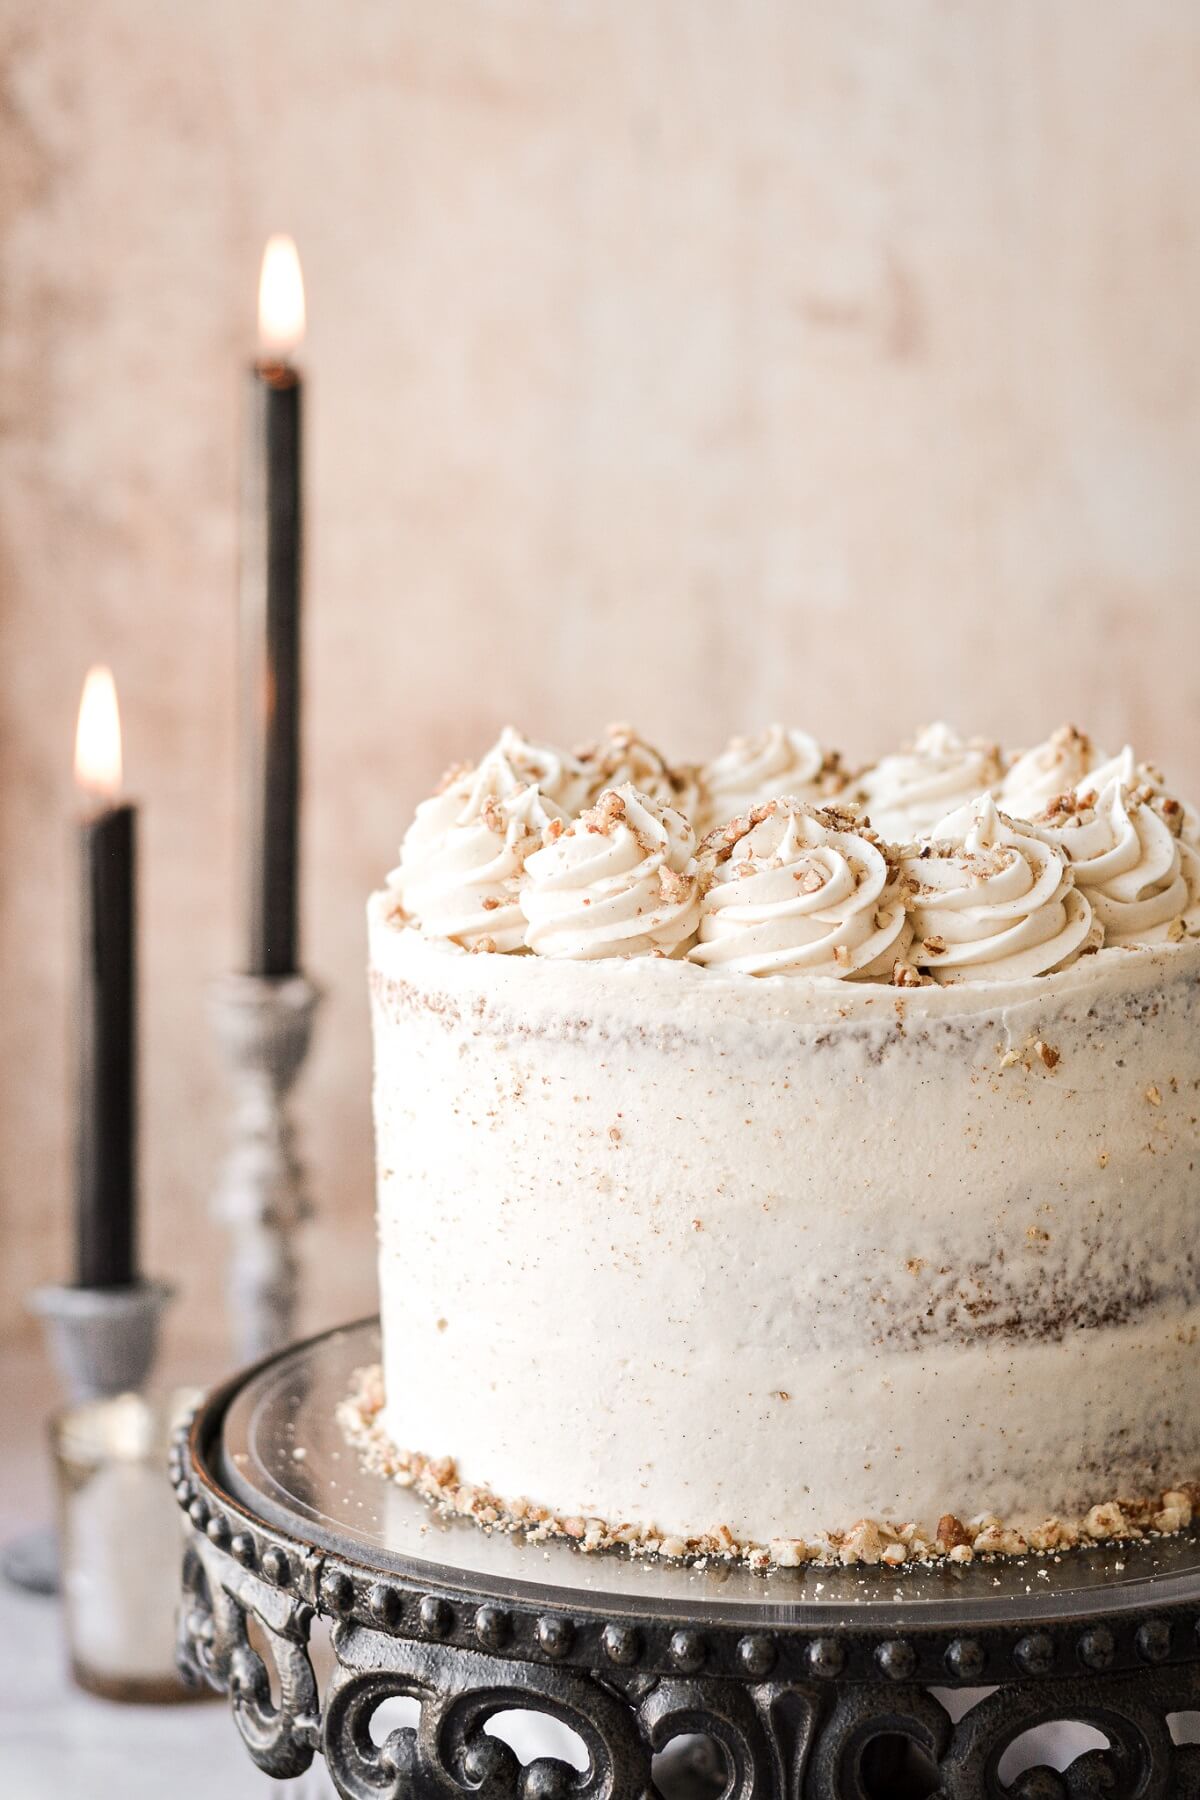 Swirls of buttercream and chopped pecans on top of a carrot cake.